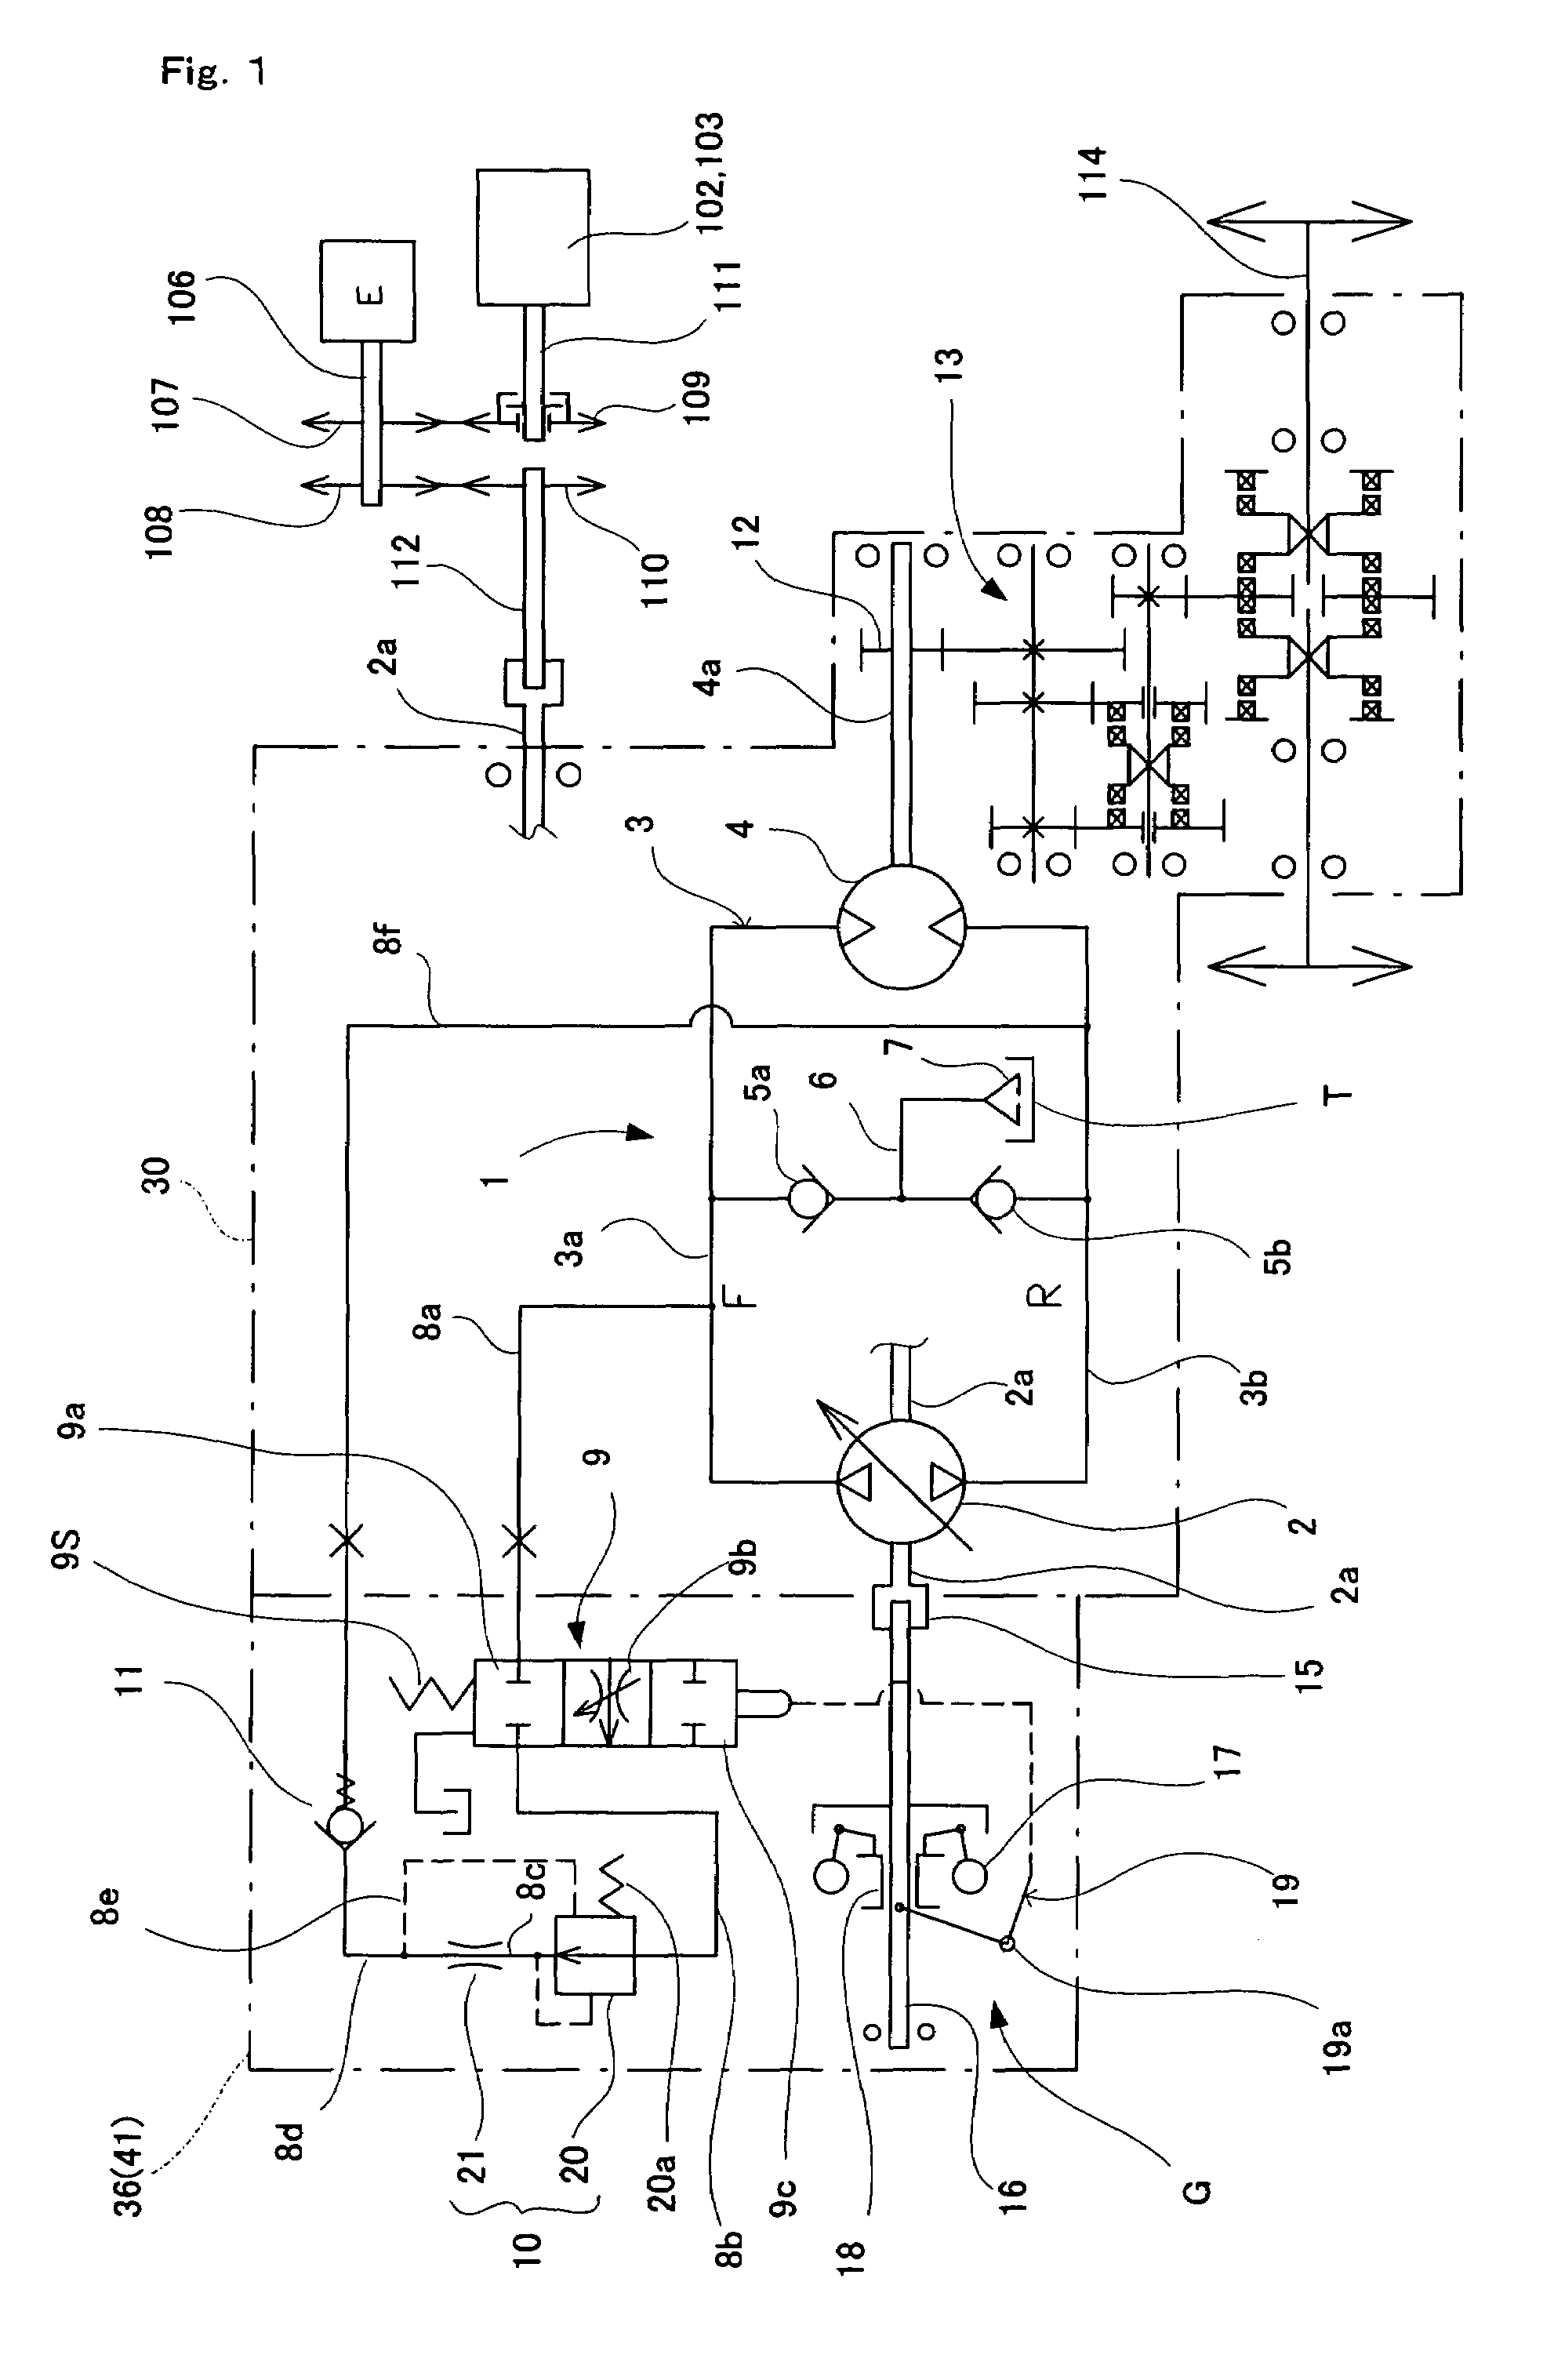 Load controller for hydrostatic transmission in work vehicles